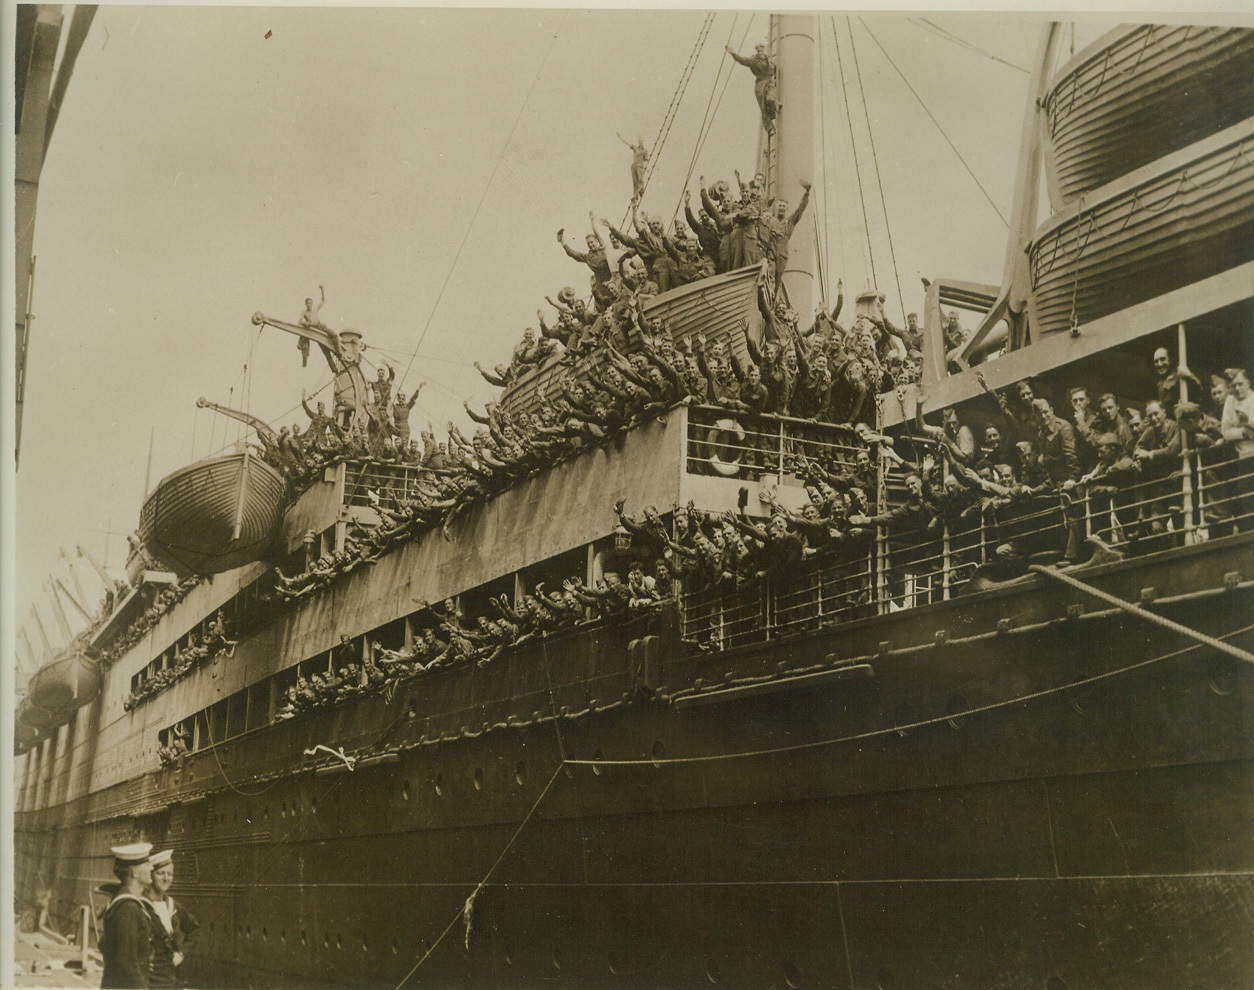 Canadians Sail for Britain. AT A CANADIAN PORT -- A fresh batch of Canadian reinforcements for England, is shown waving good-bye as their ship eased out of its berth from an East Coast port. Credit: (ACME);